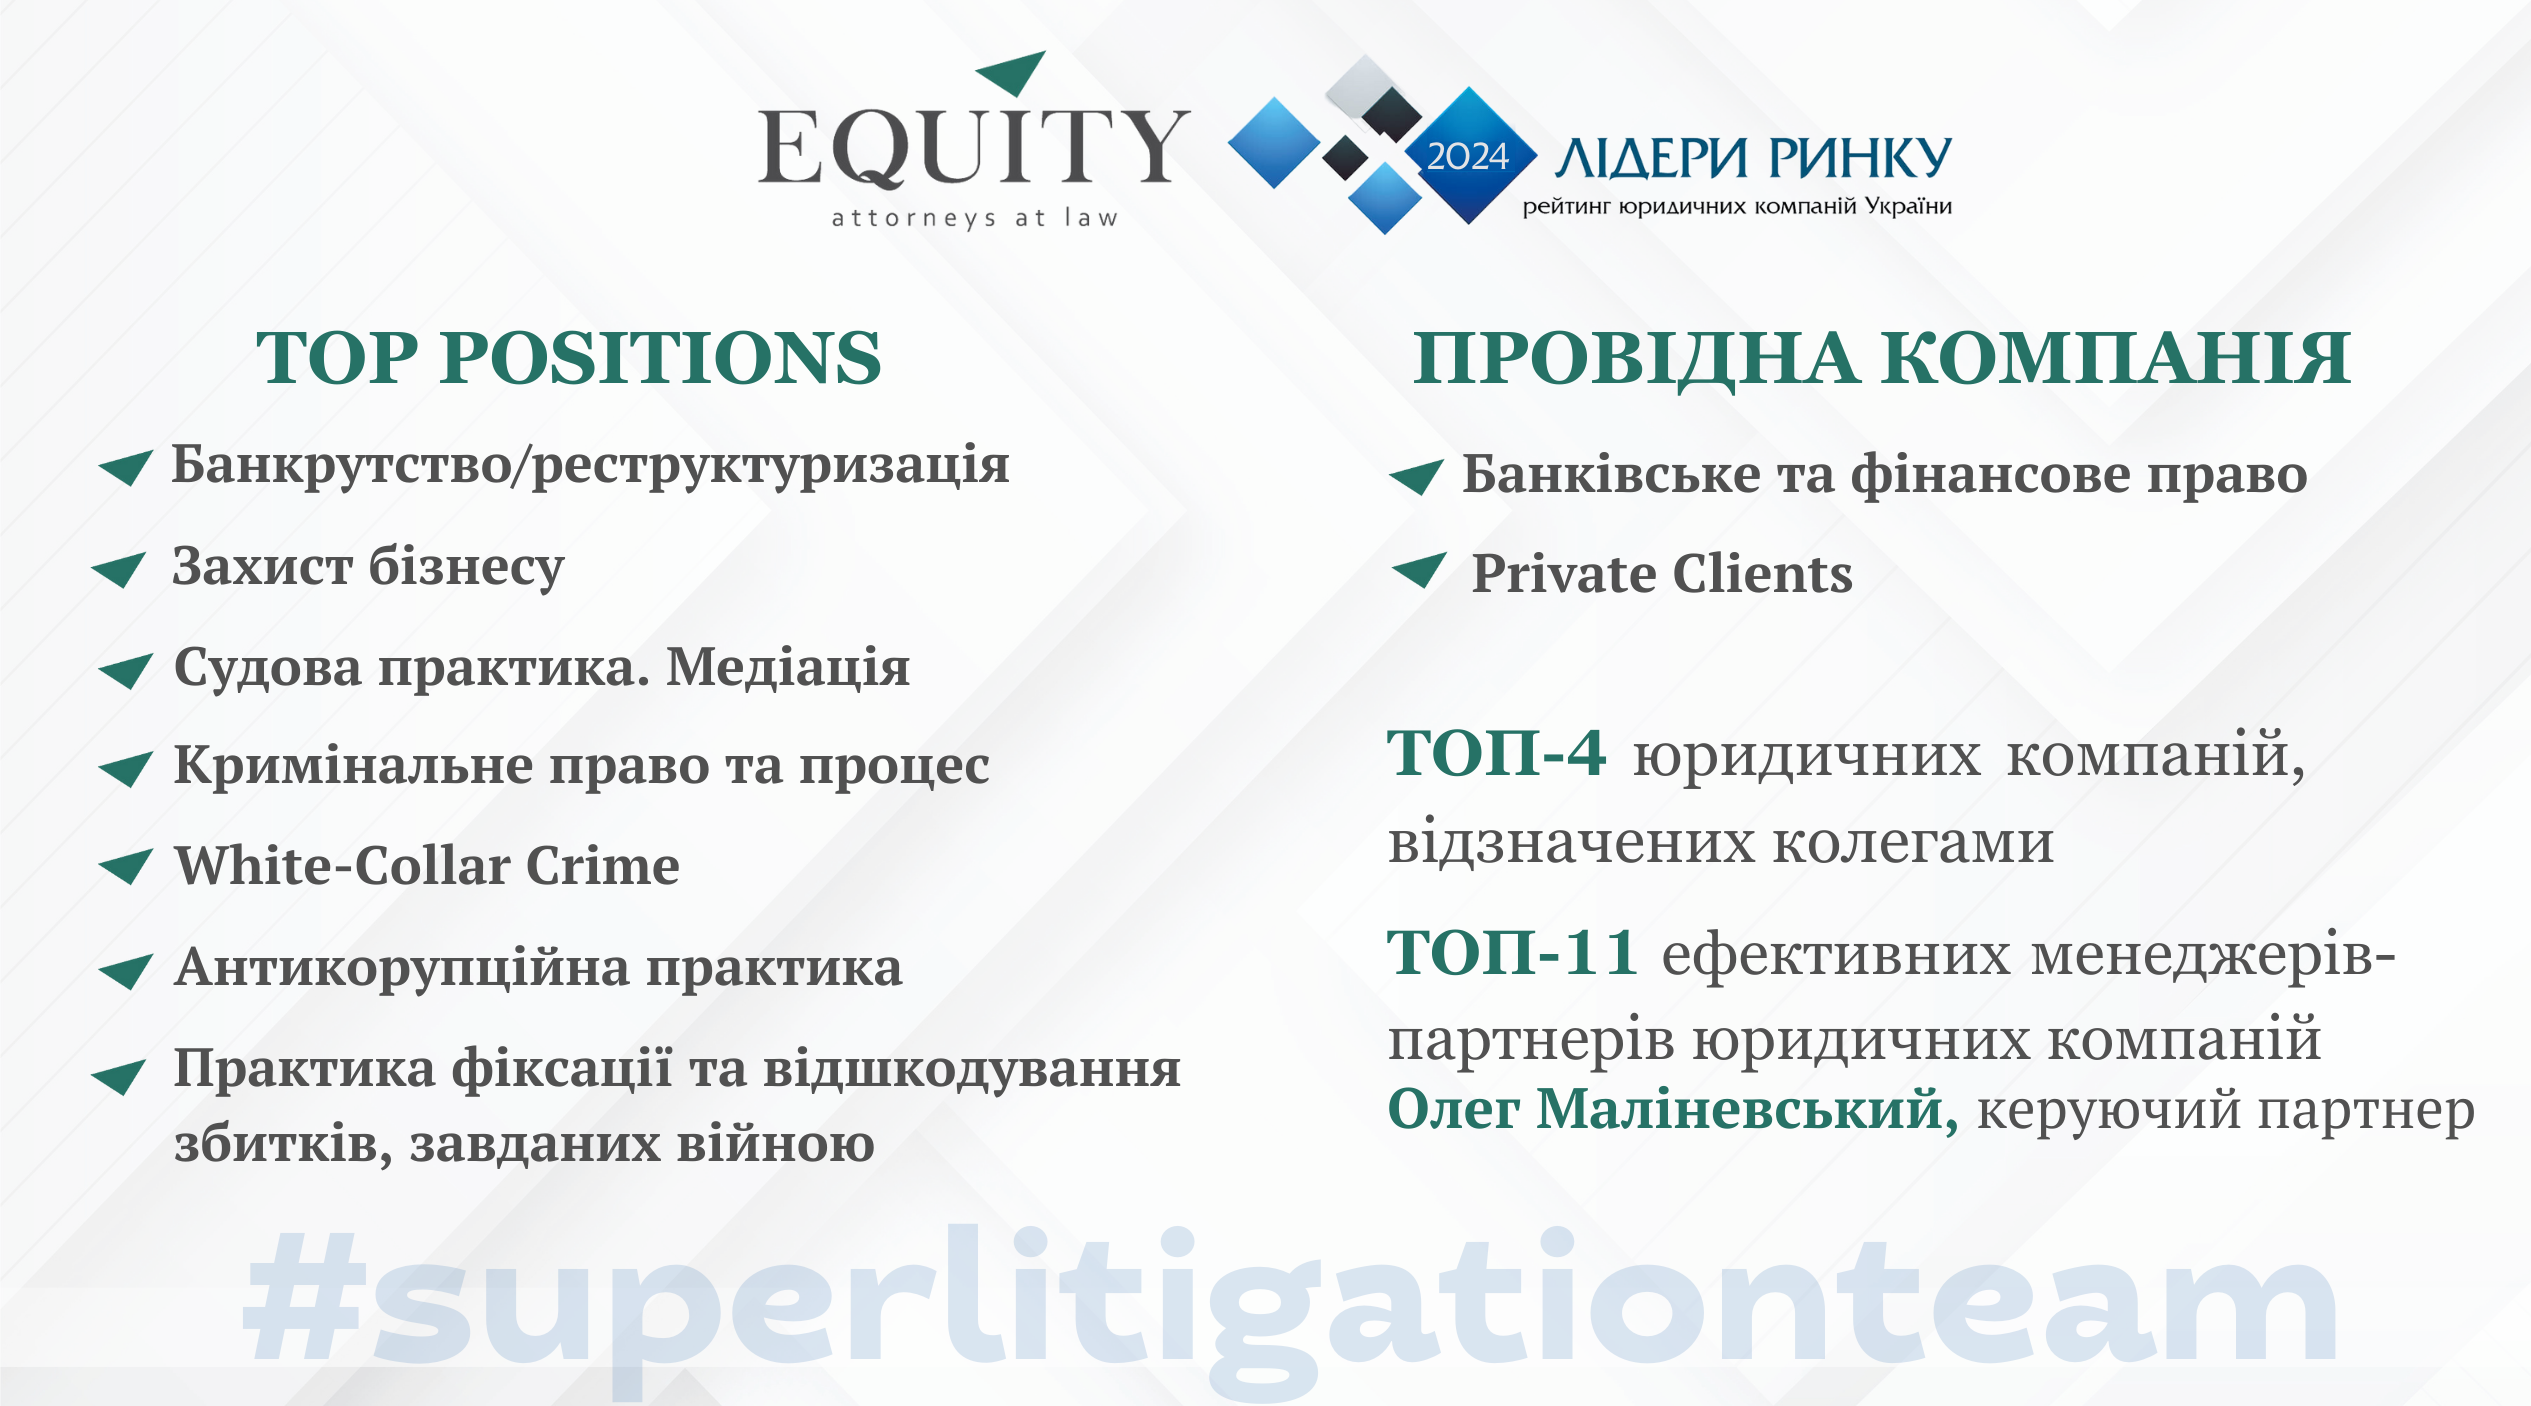 EQUITY is highly recognized in the annual directory "Market Leaders 2024"